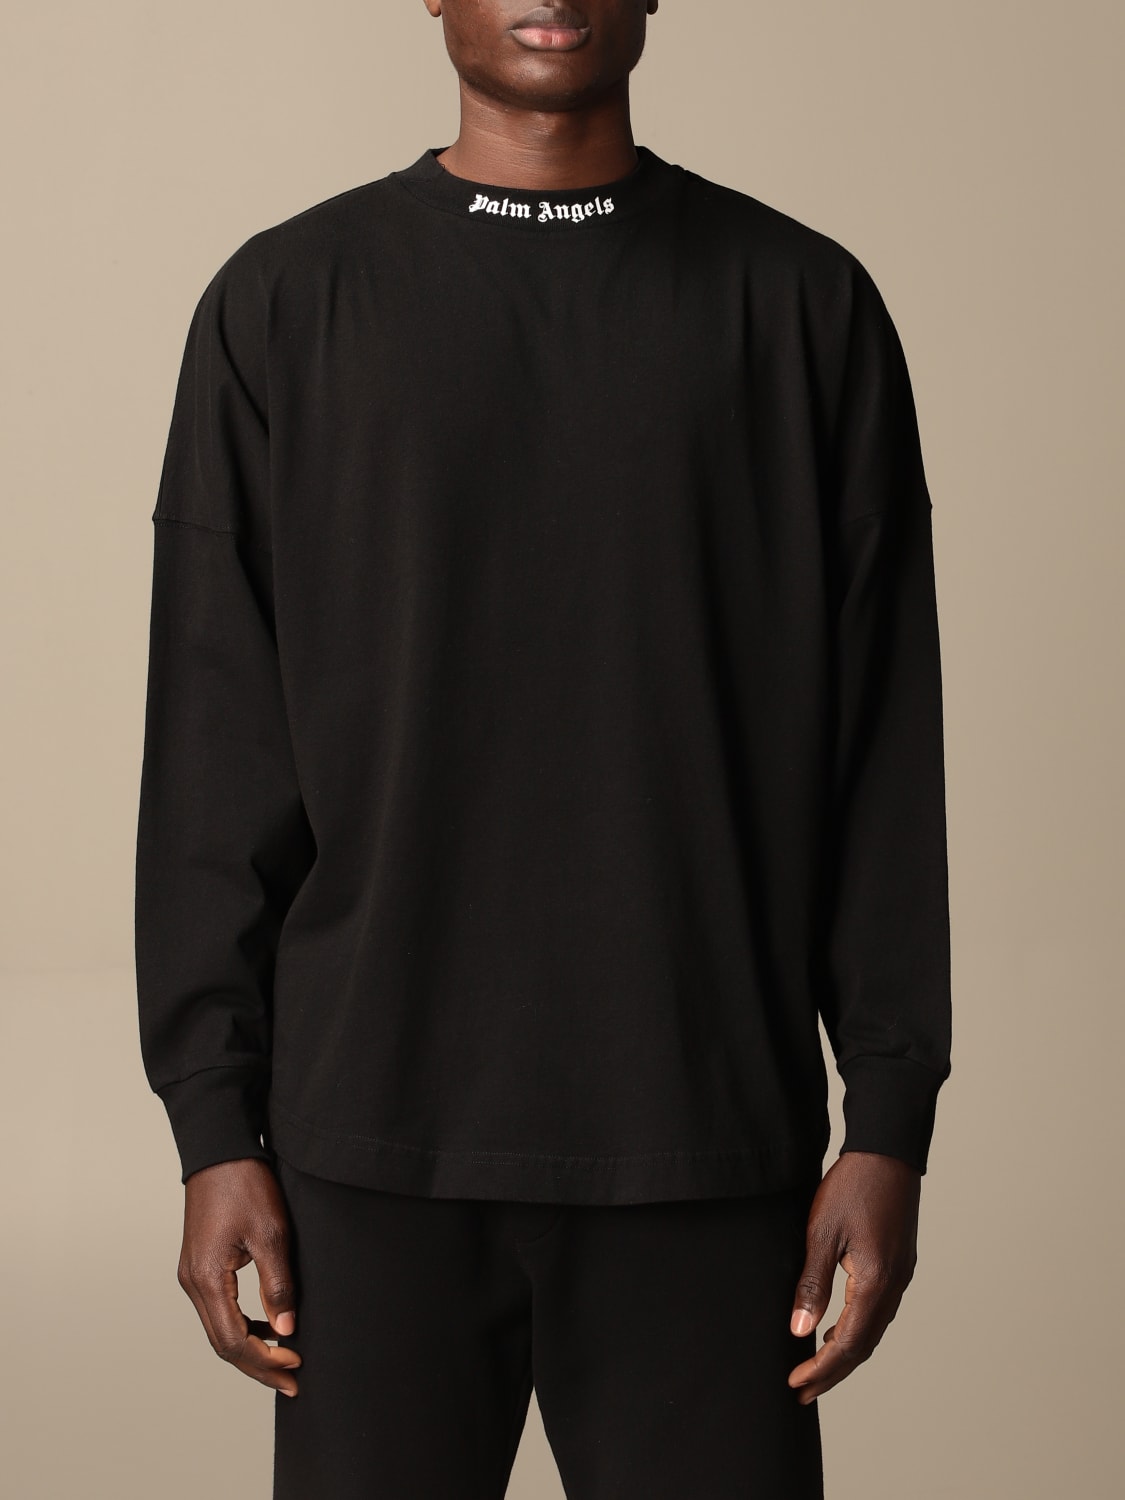 PALM ANGELS: long sleeve T-shirt with maxi logo - Black  PALM ANGELS  t-shirt PMAB001R21JER001 online at